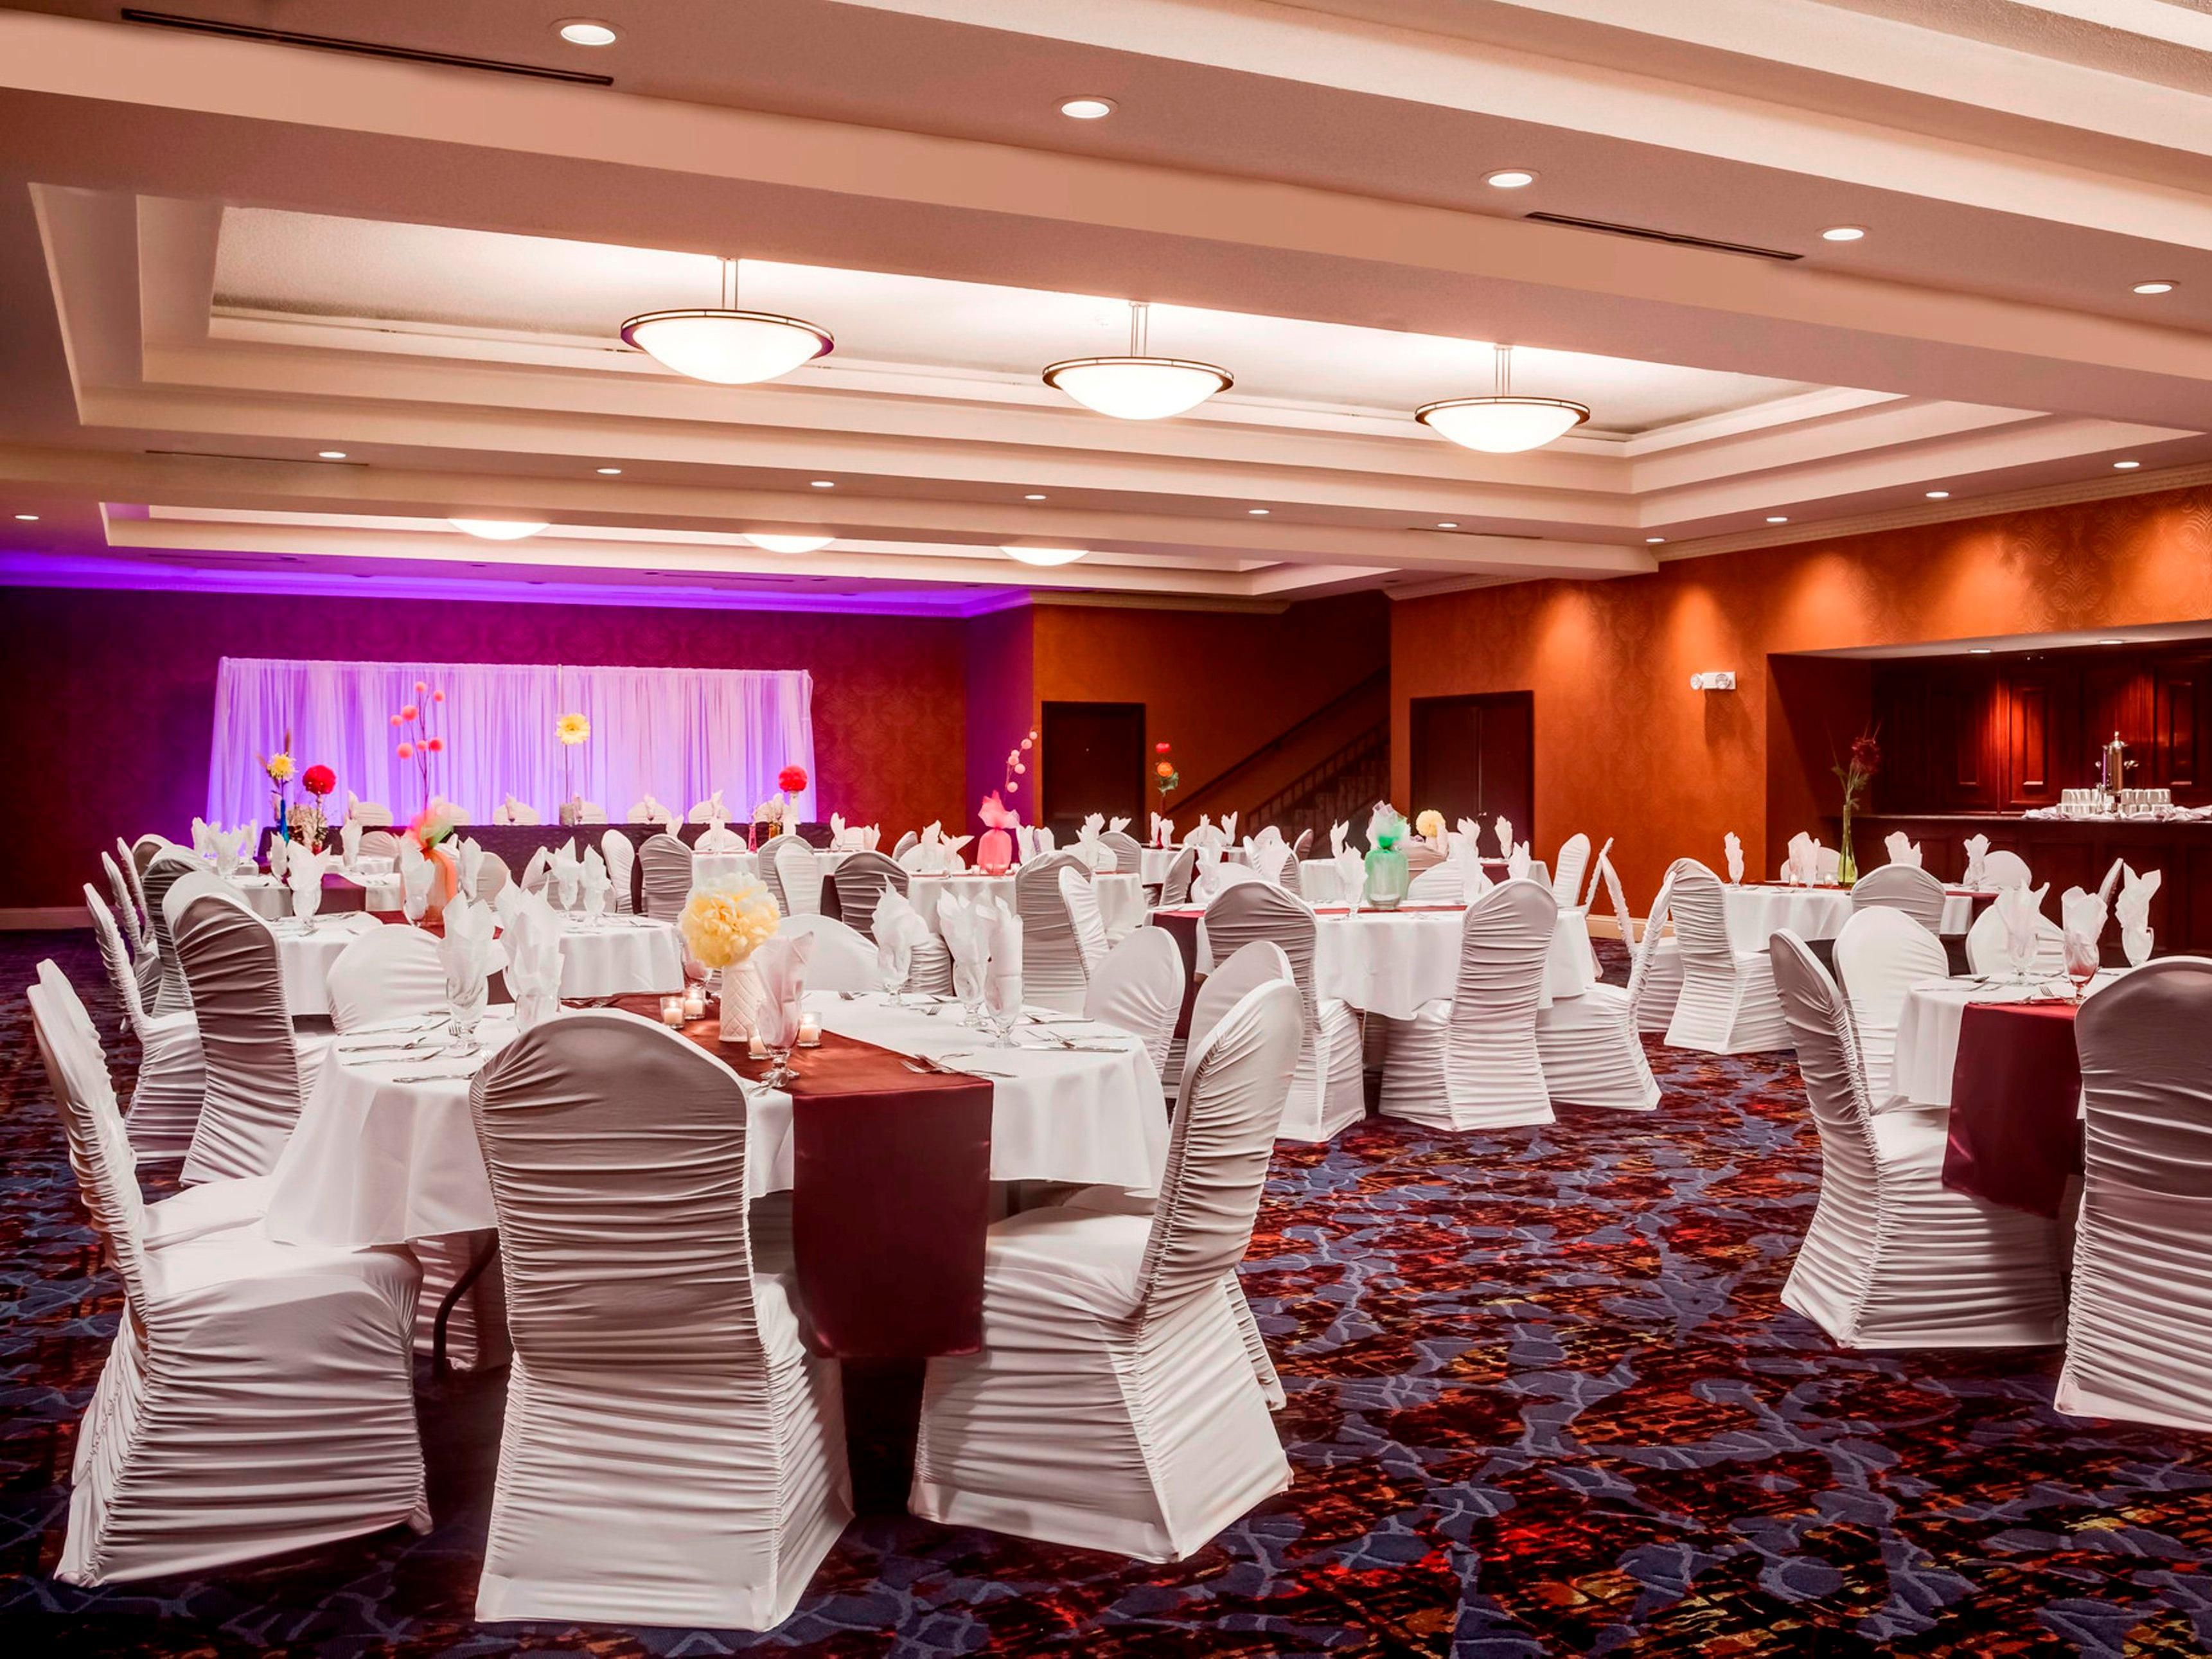 Let our Catering and Events team help you plan the wedding and reception of your dreams.  With over 9,000 square feet of event space inside our hotel, we can customize something just for you.  Contact Bobbie at 563-239-5187, and let us show you events made simple.  